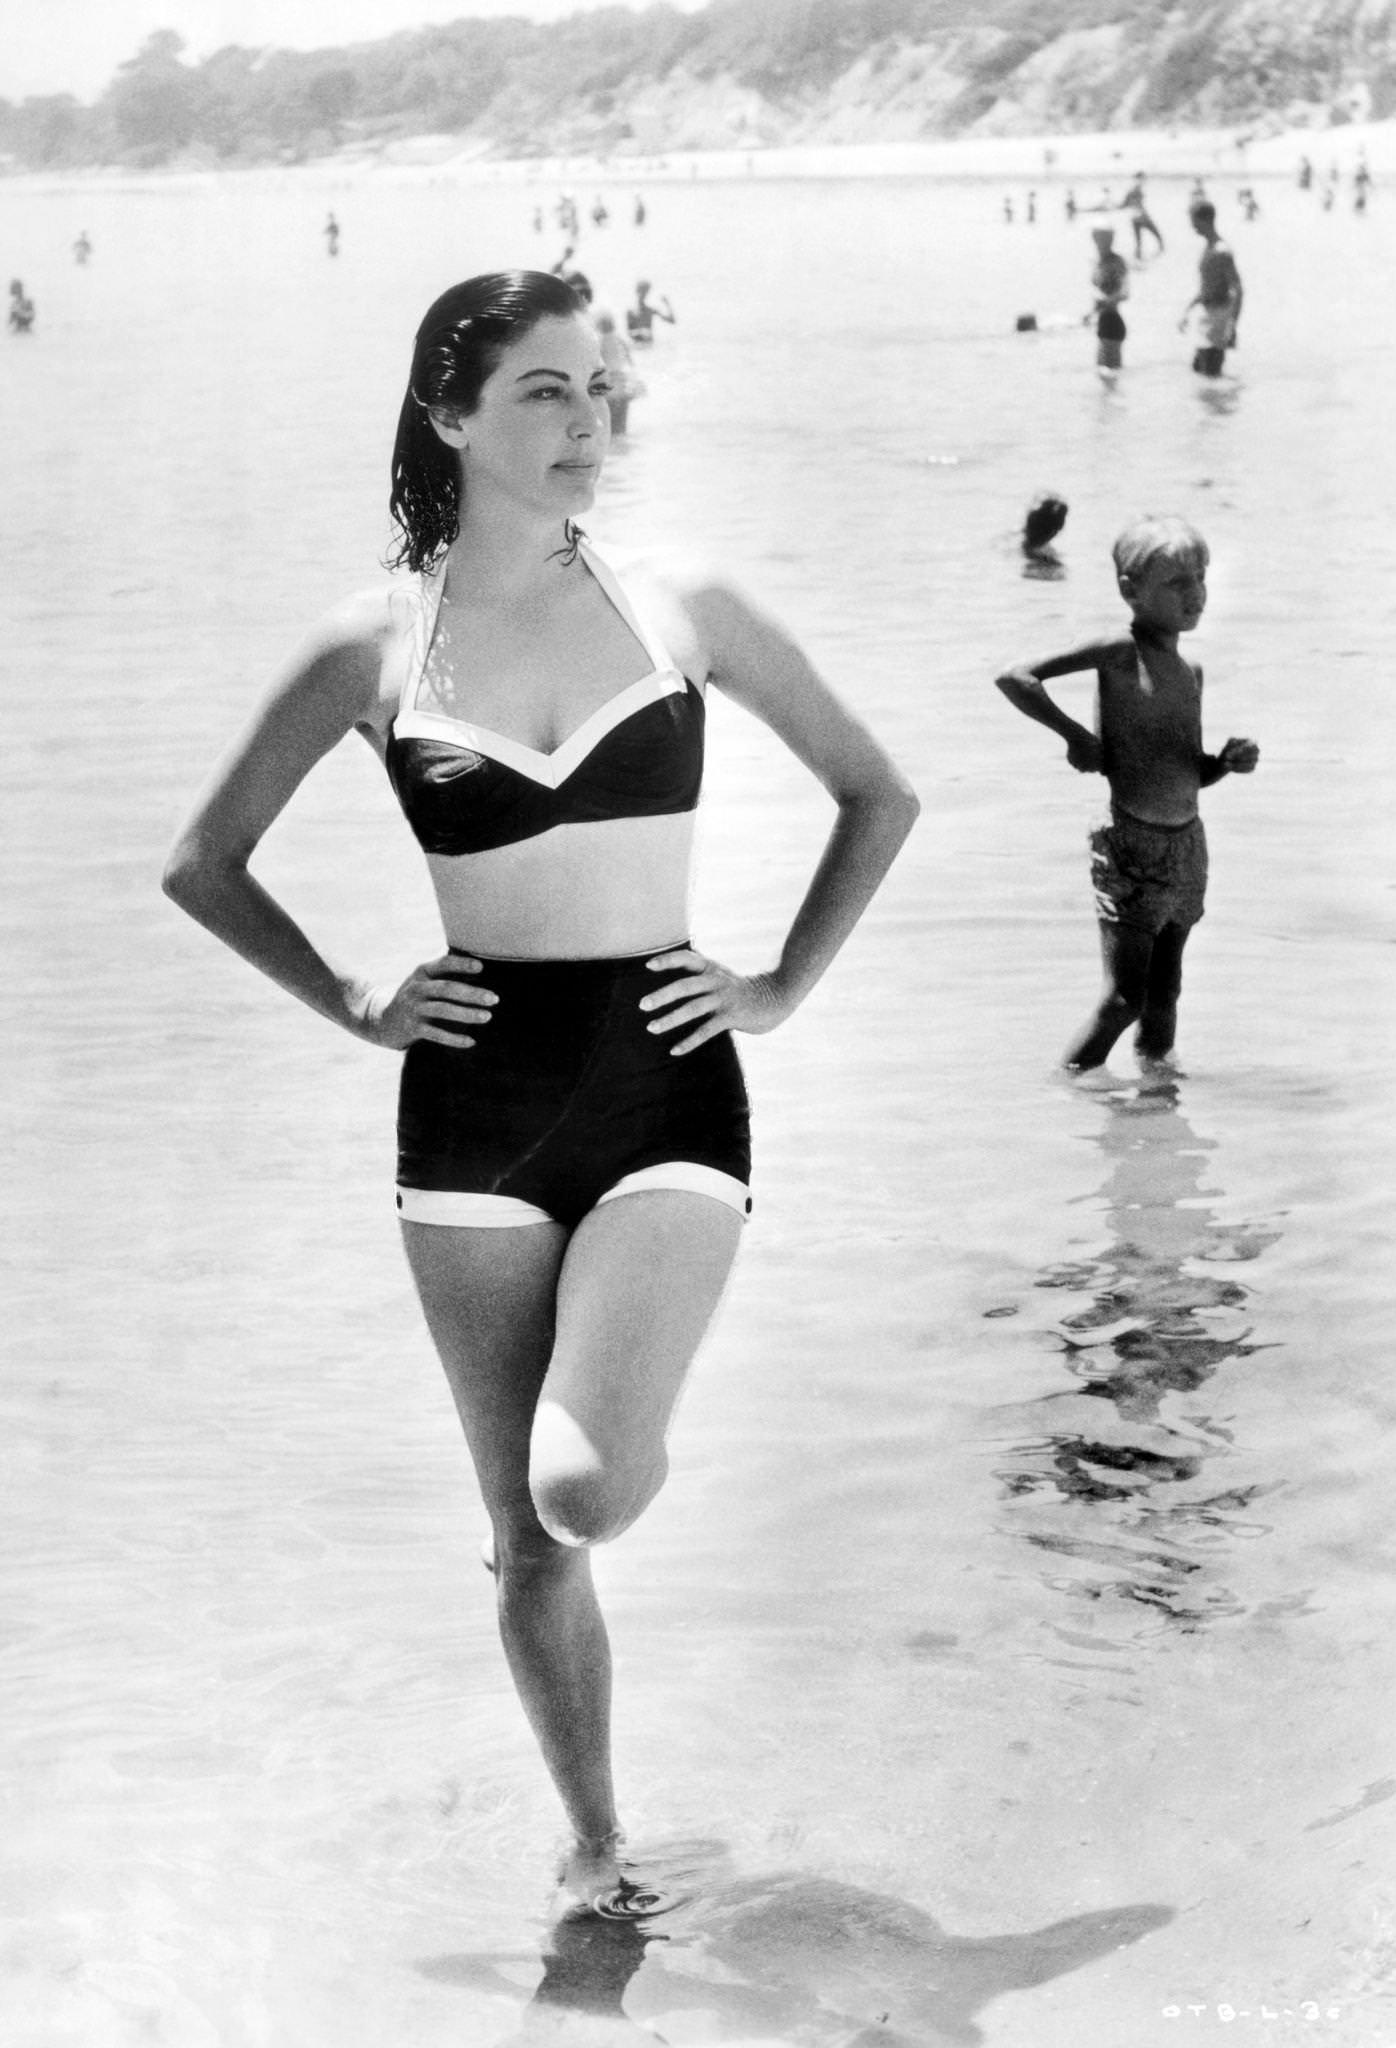 Ava Gardner on the beach in a two-piece bathing suit